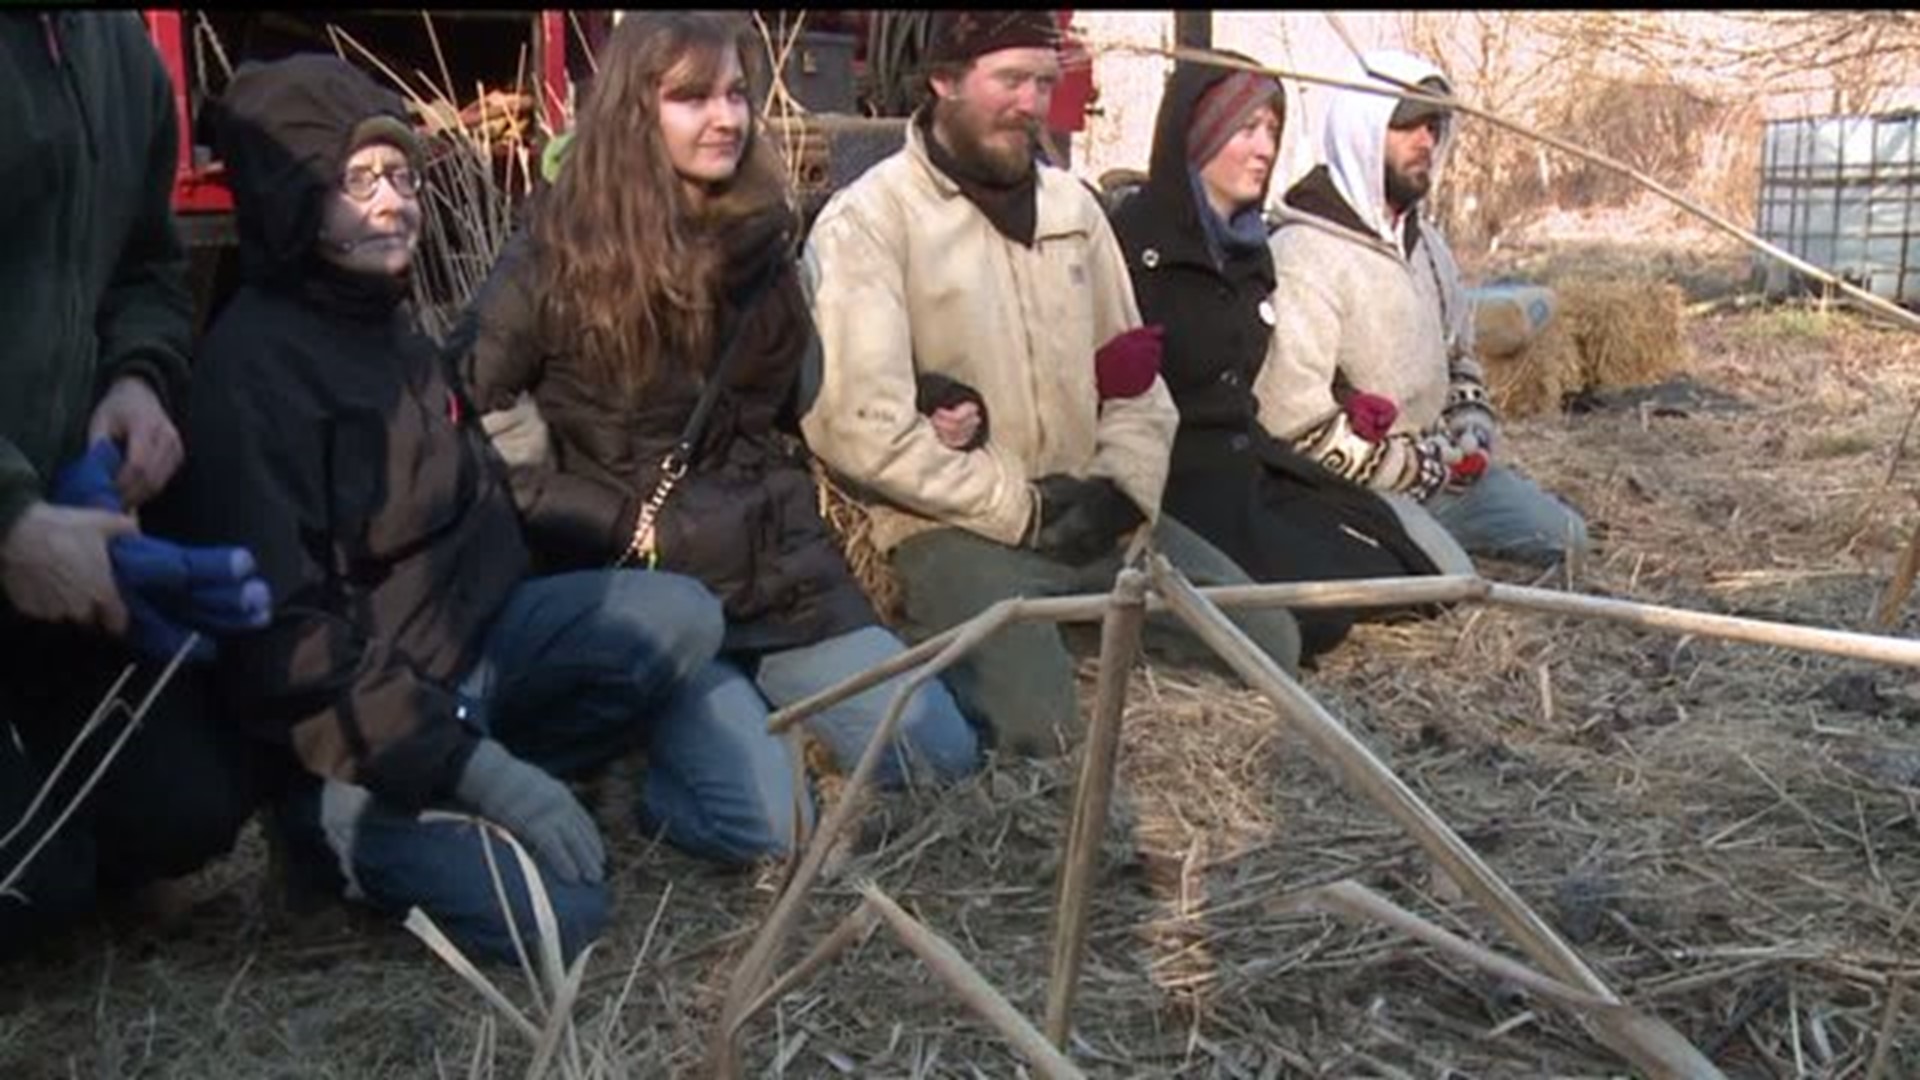 Lancaster pipeline protest leads to arrests